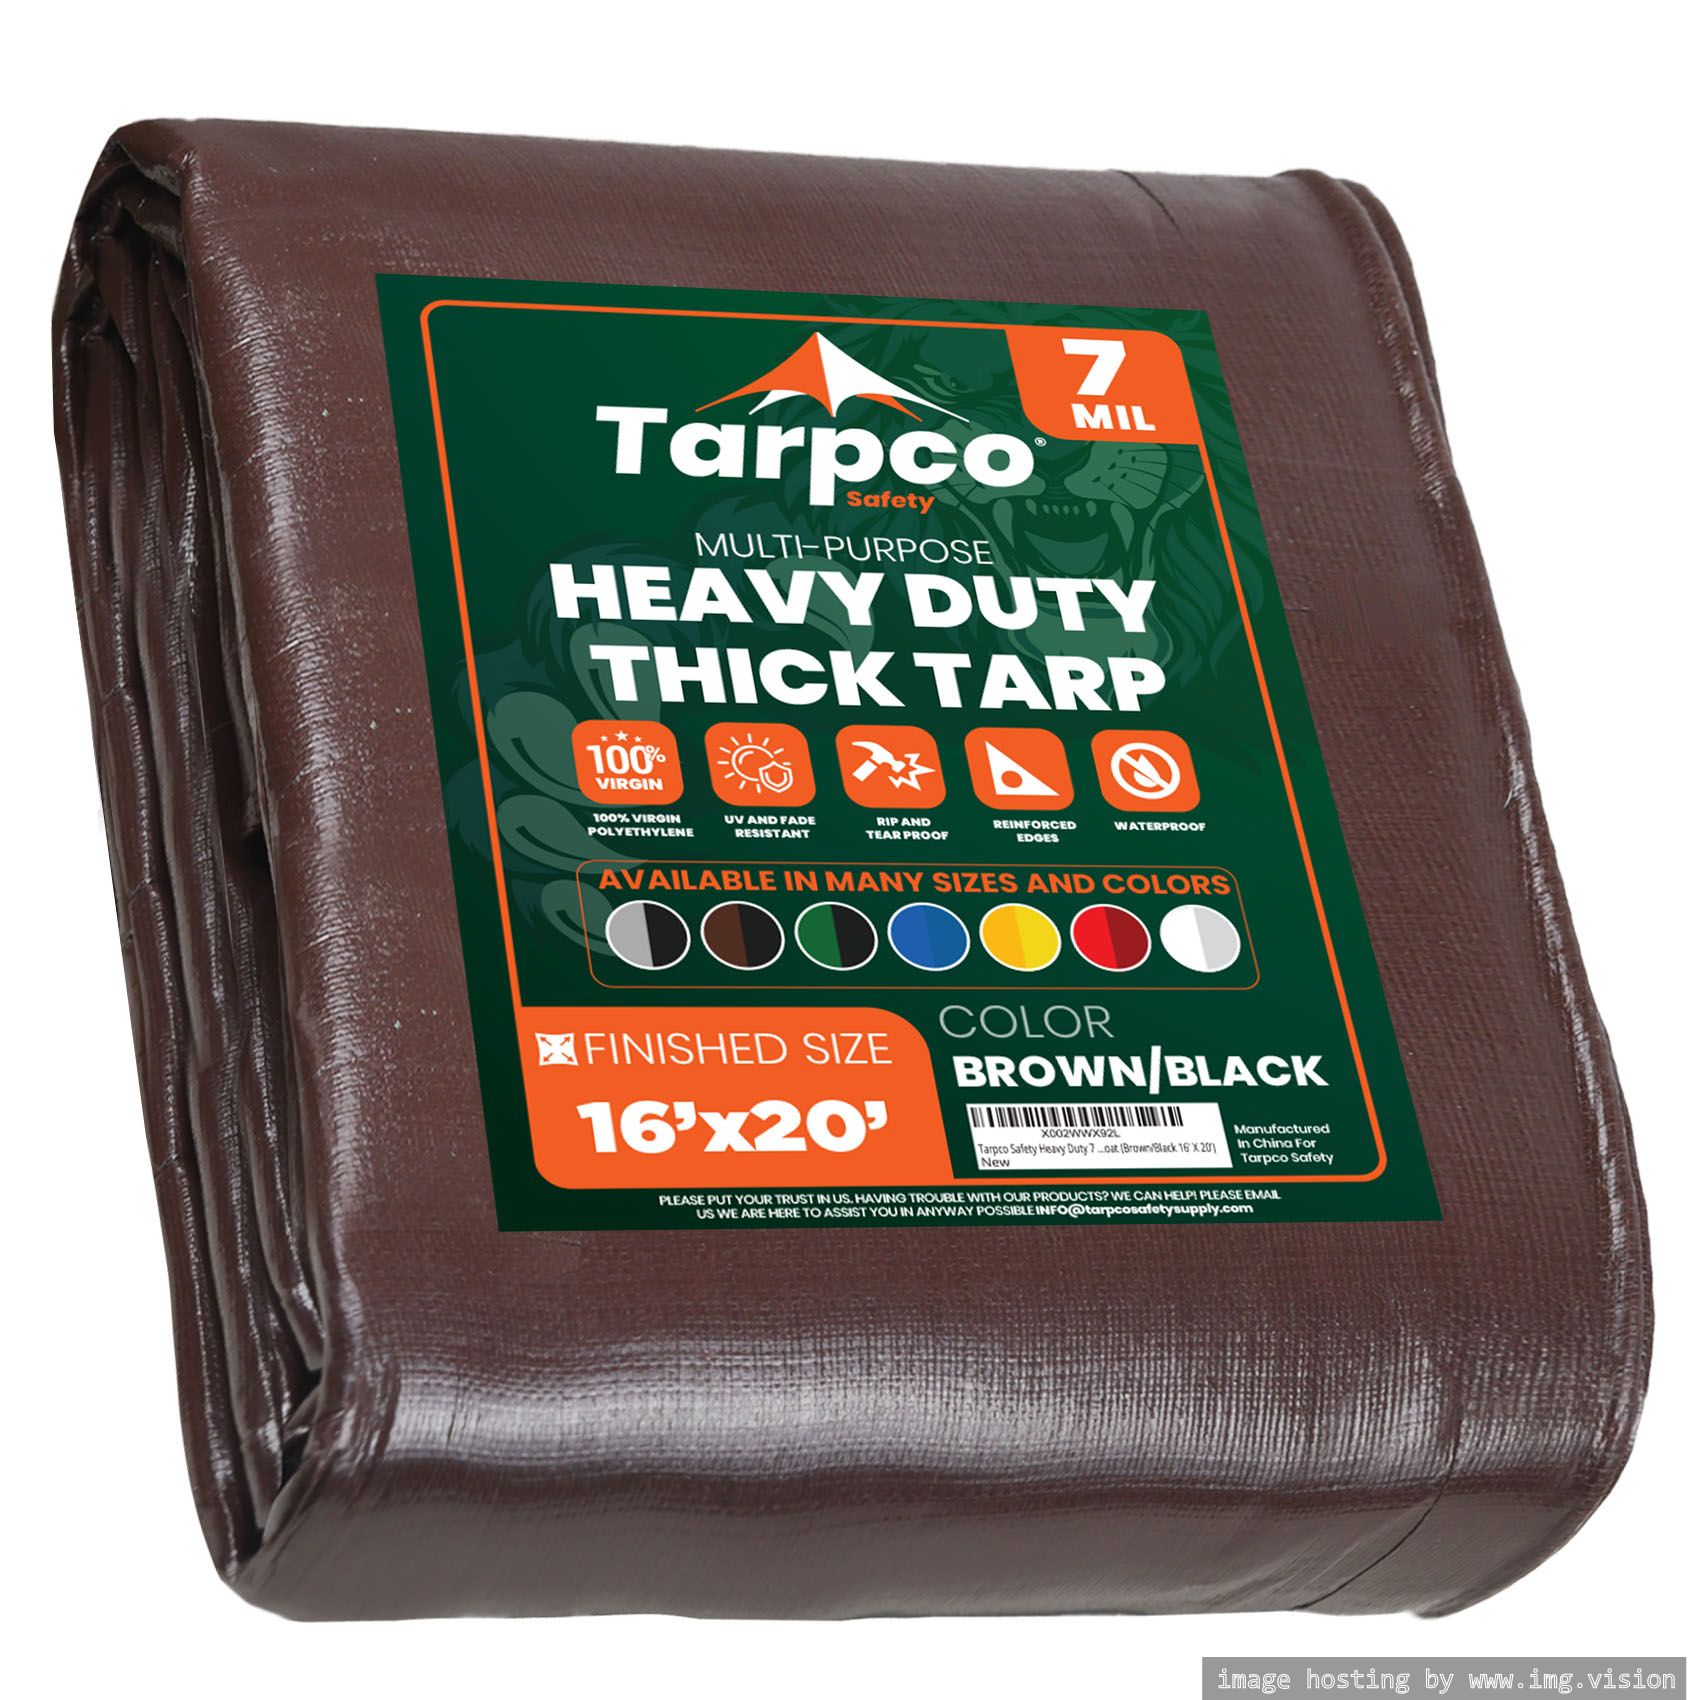 Tarpco Safety Heavy Duty 7 Mil Tarp Cover 16′ X 20′ Brown/Black UV Resistant, Rip and Tear Proof.